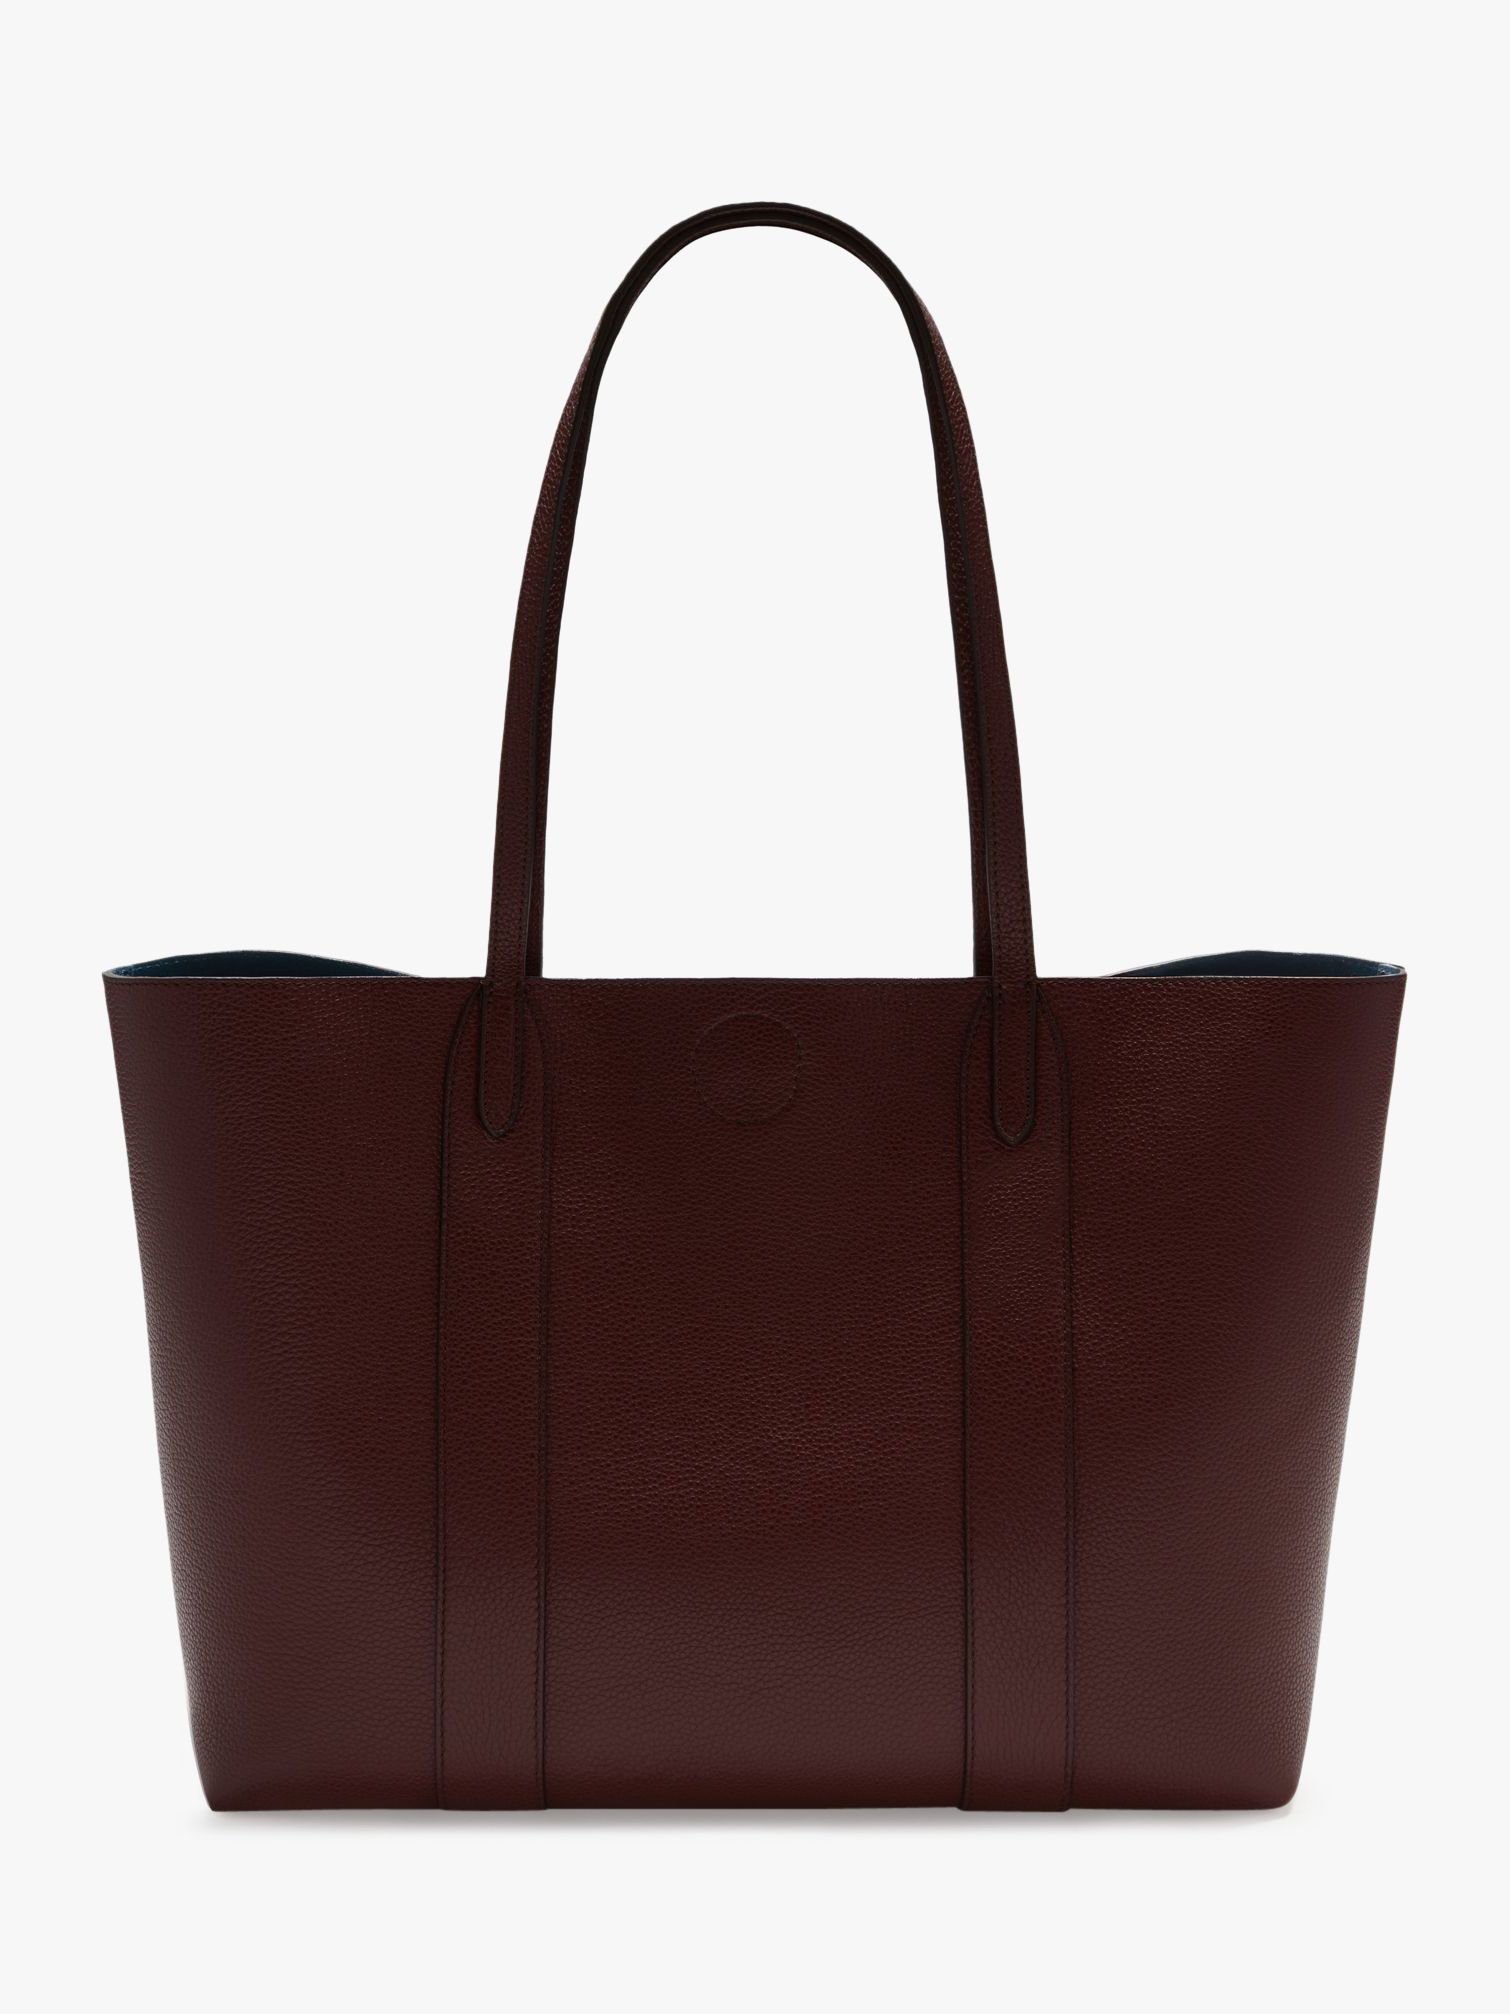 Mulberry Bayswater Small Classic Grain Leather Tote Bag, Red